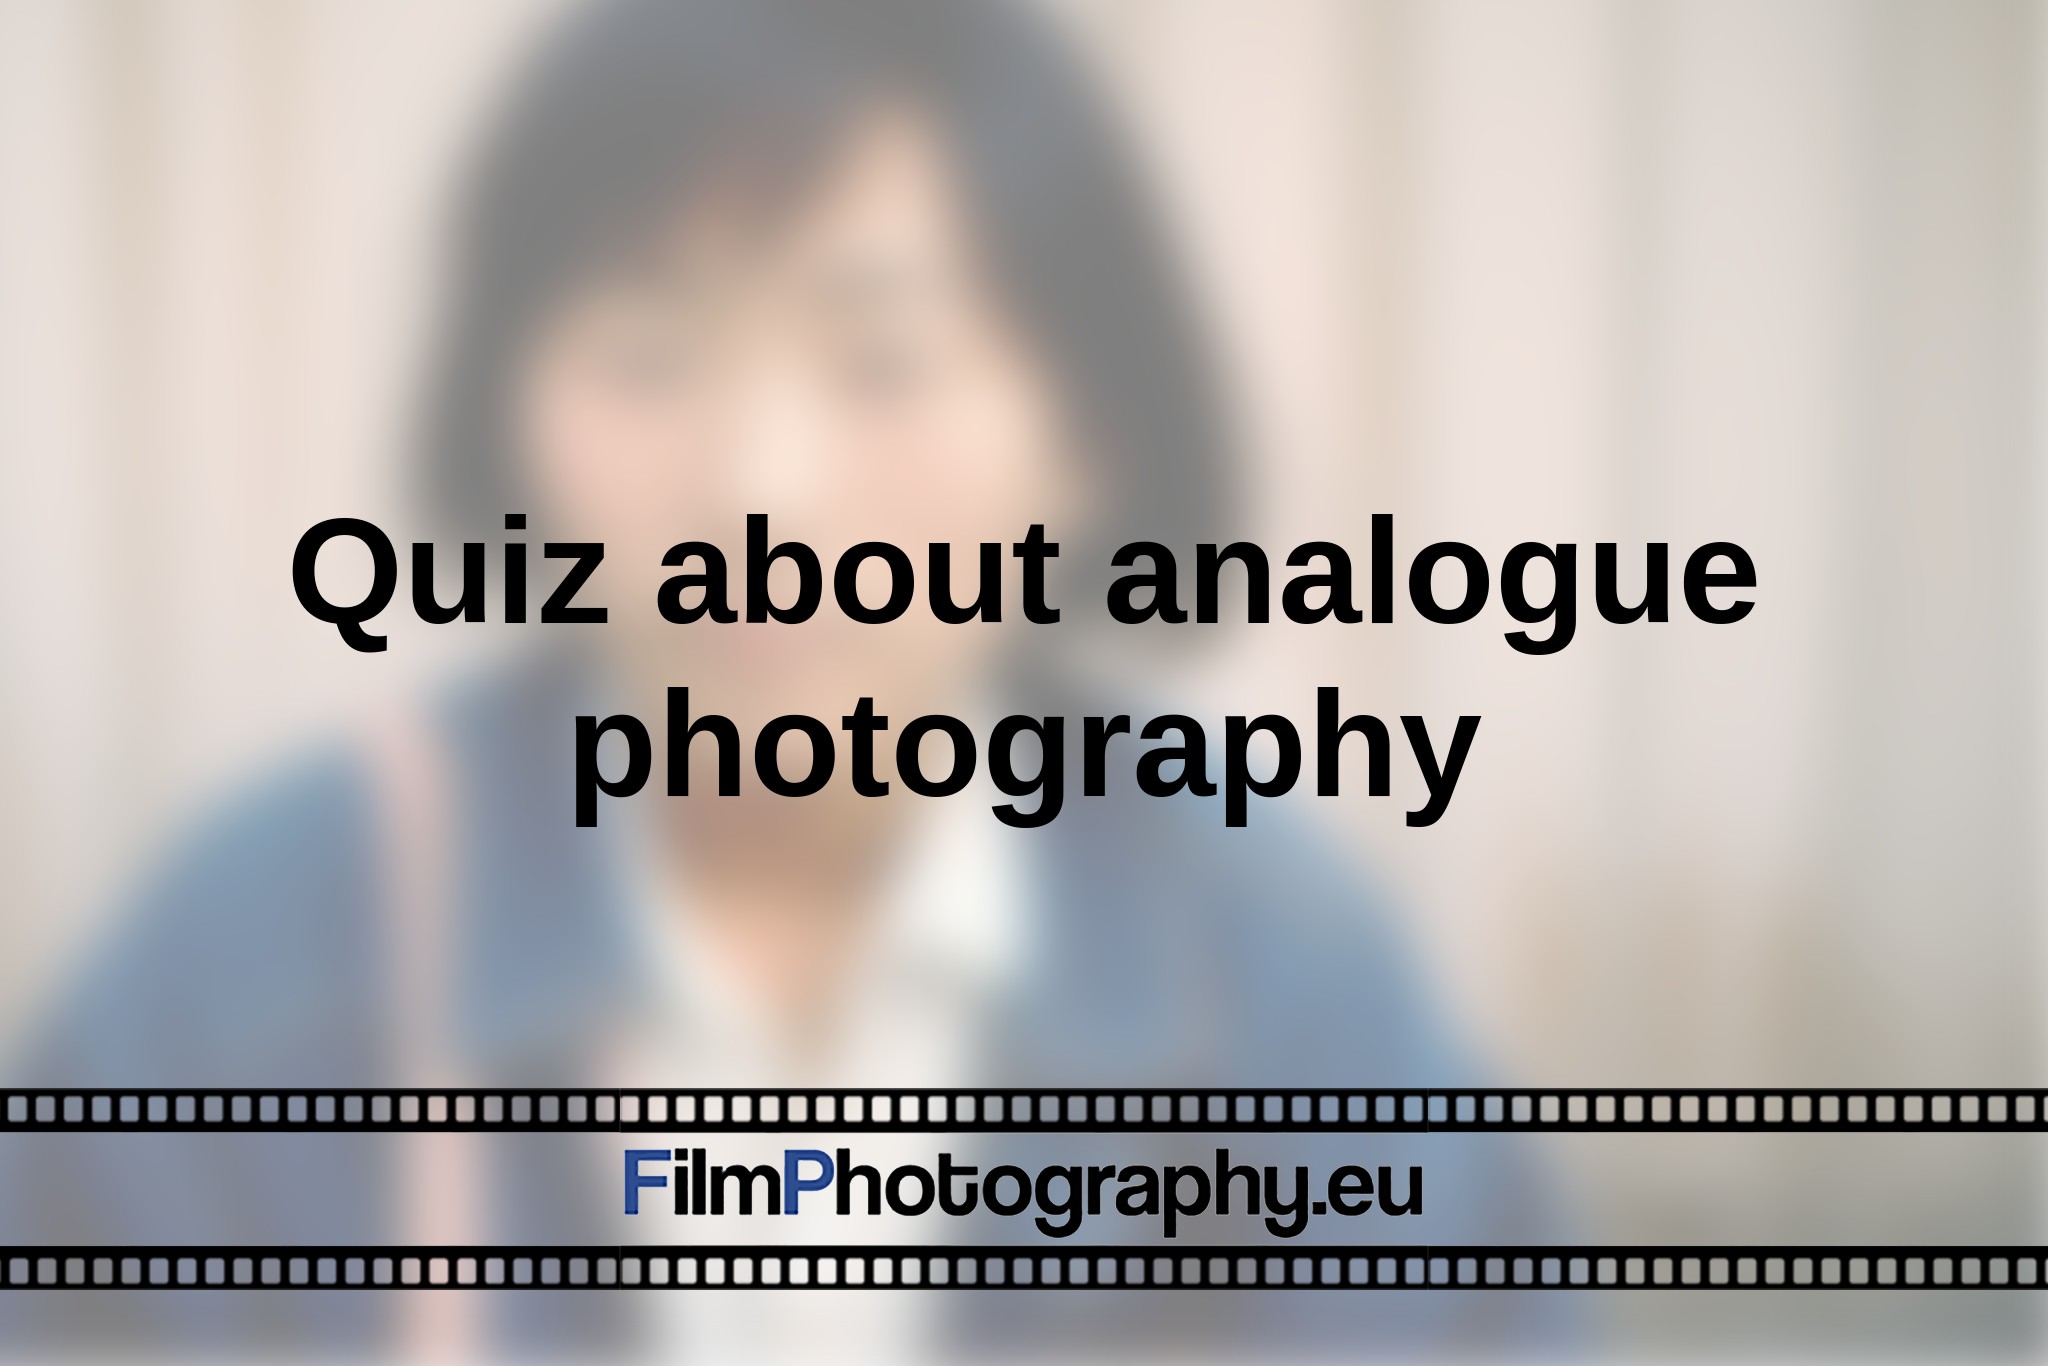 quiz-about-analogue-photography-en-bnv.jpg